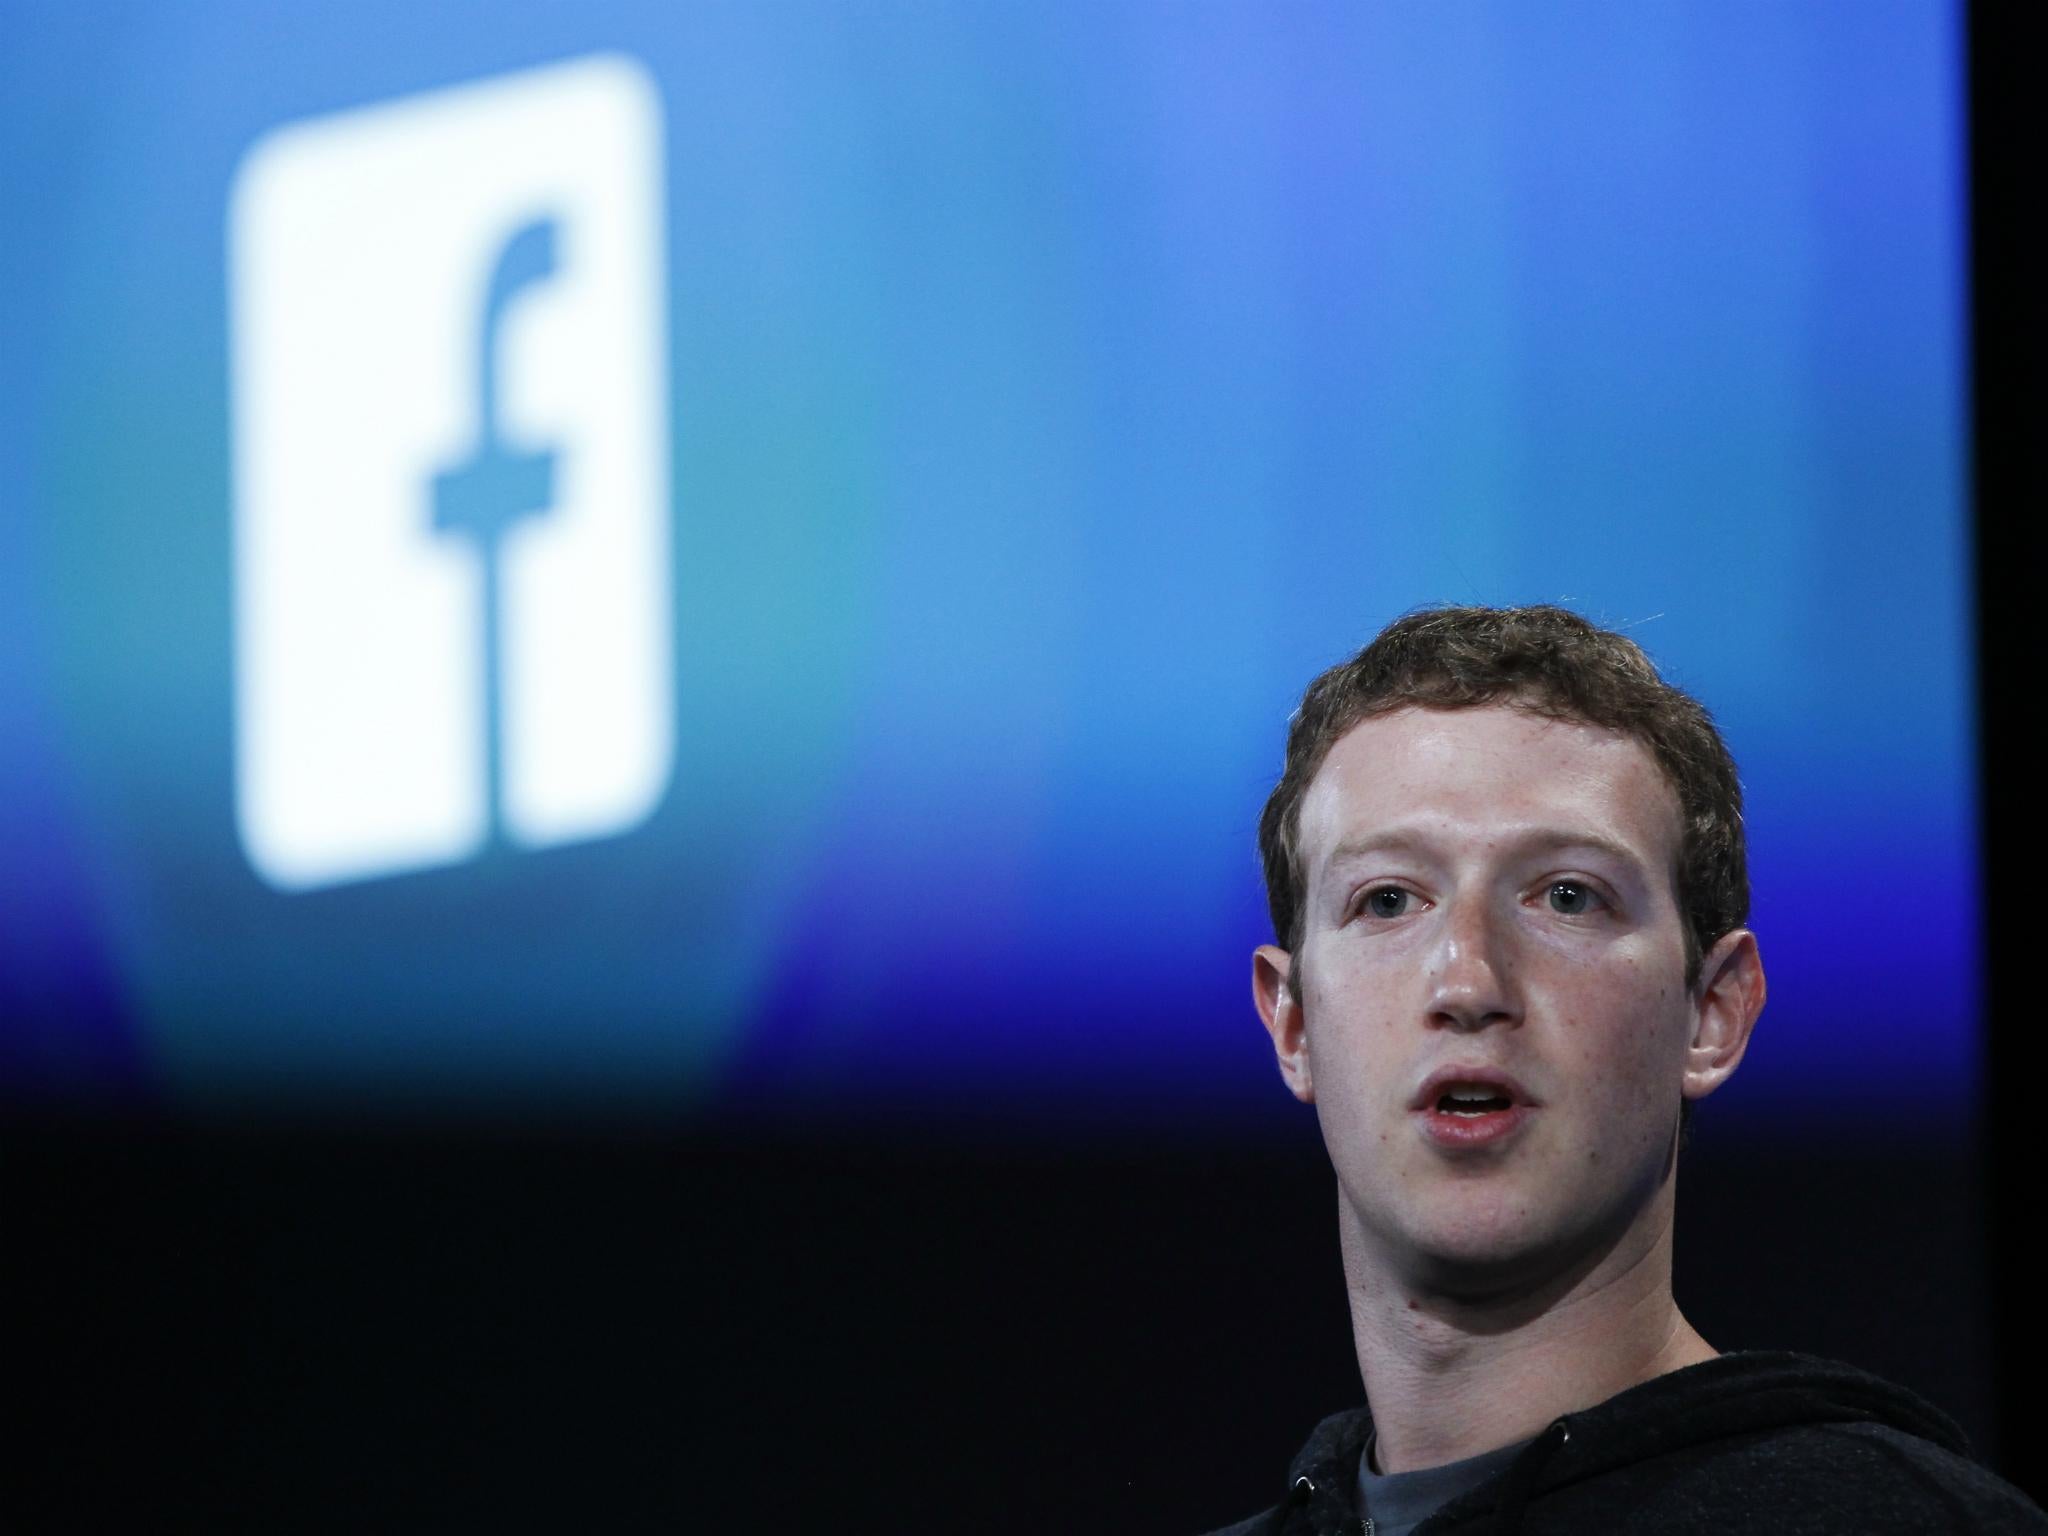 Mark Zuckerberg, Facebook's co-founder and chief executive introduces 'Home' a Facebook app suite that integrates with Android during a Facebook press event in Menlo Park, California, April 4, 2013